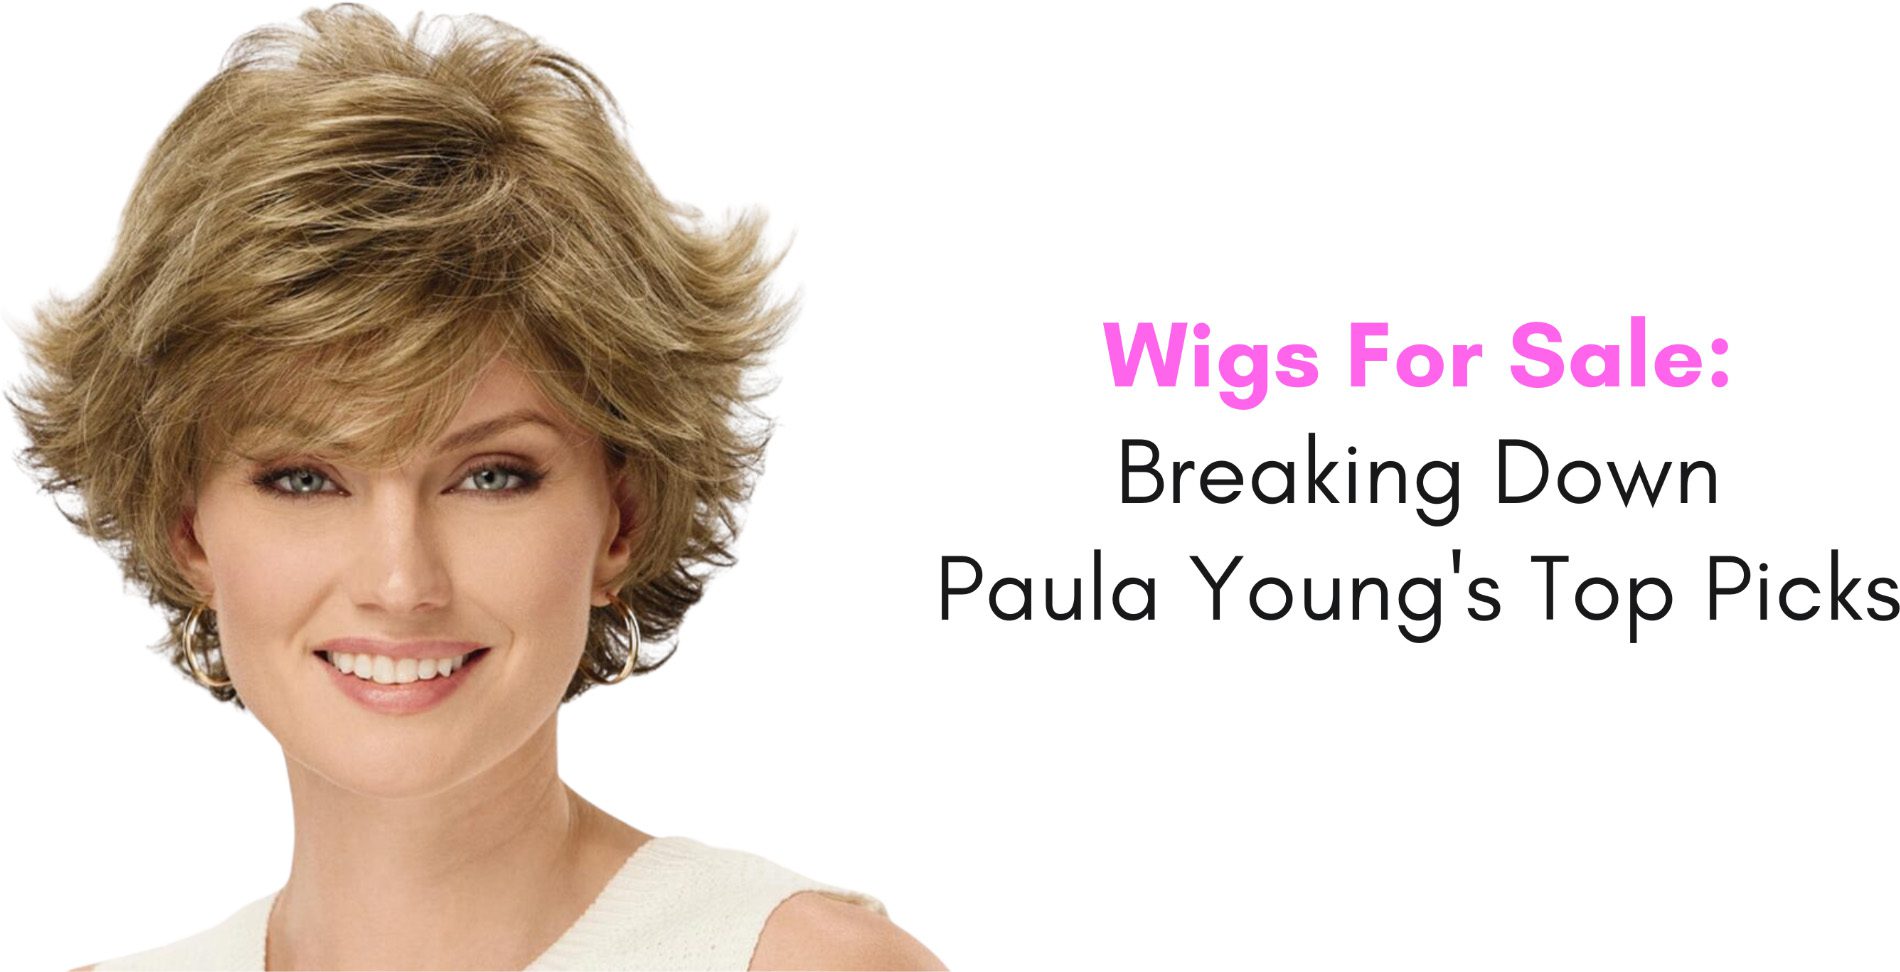 wigs for sale breaking down paula youngs top picks